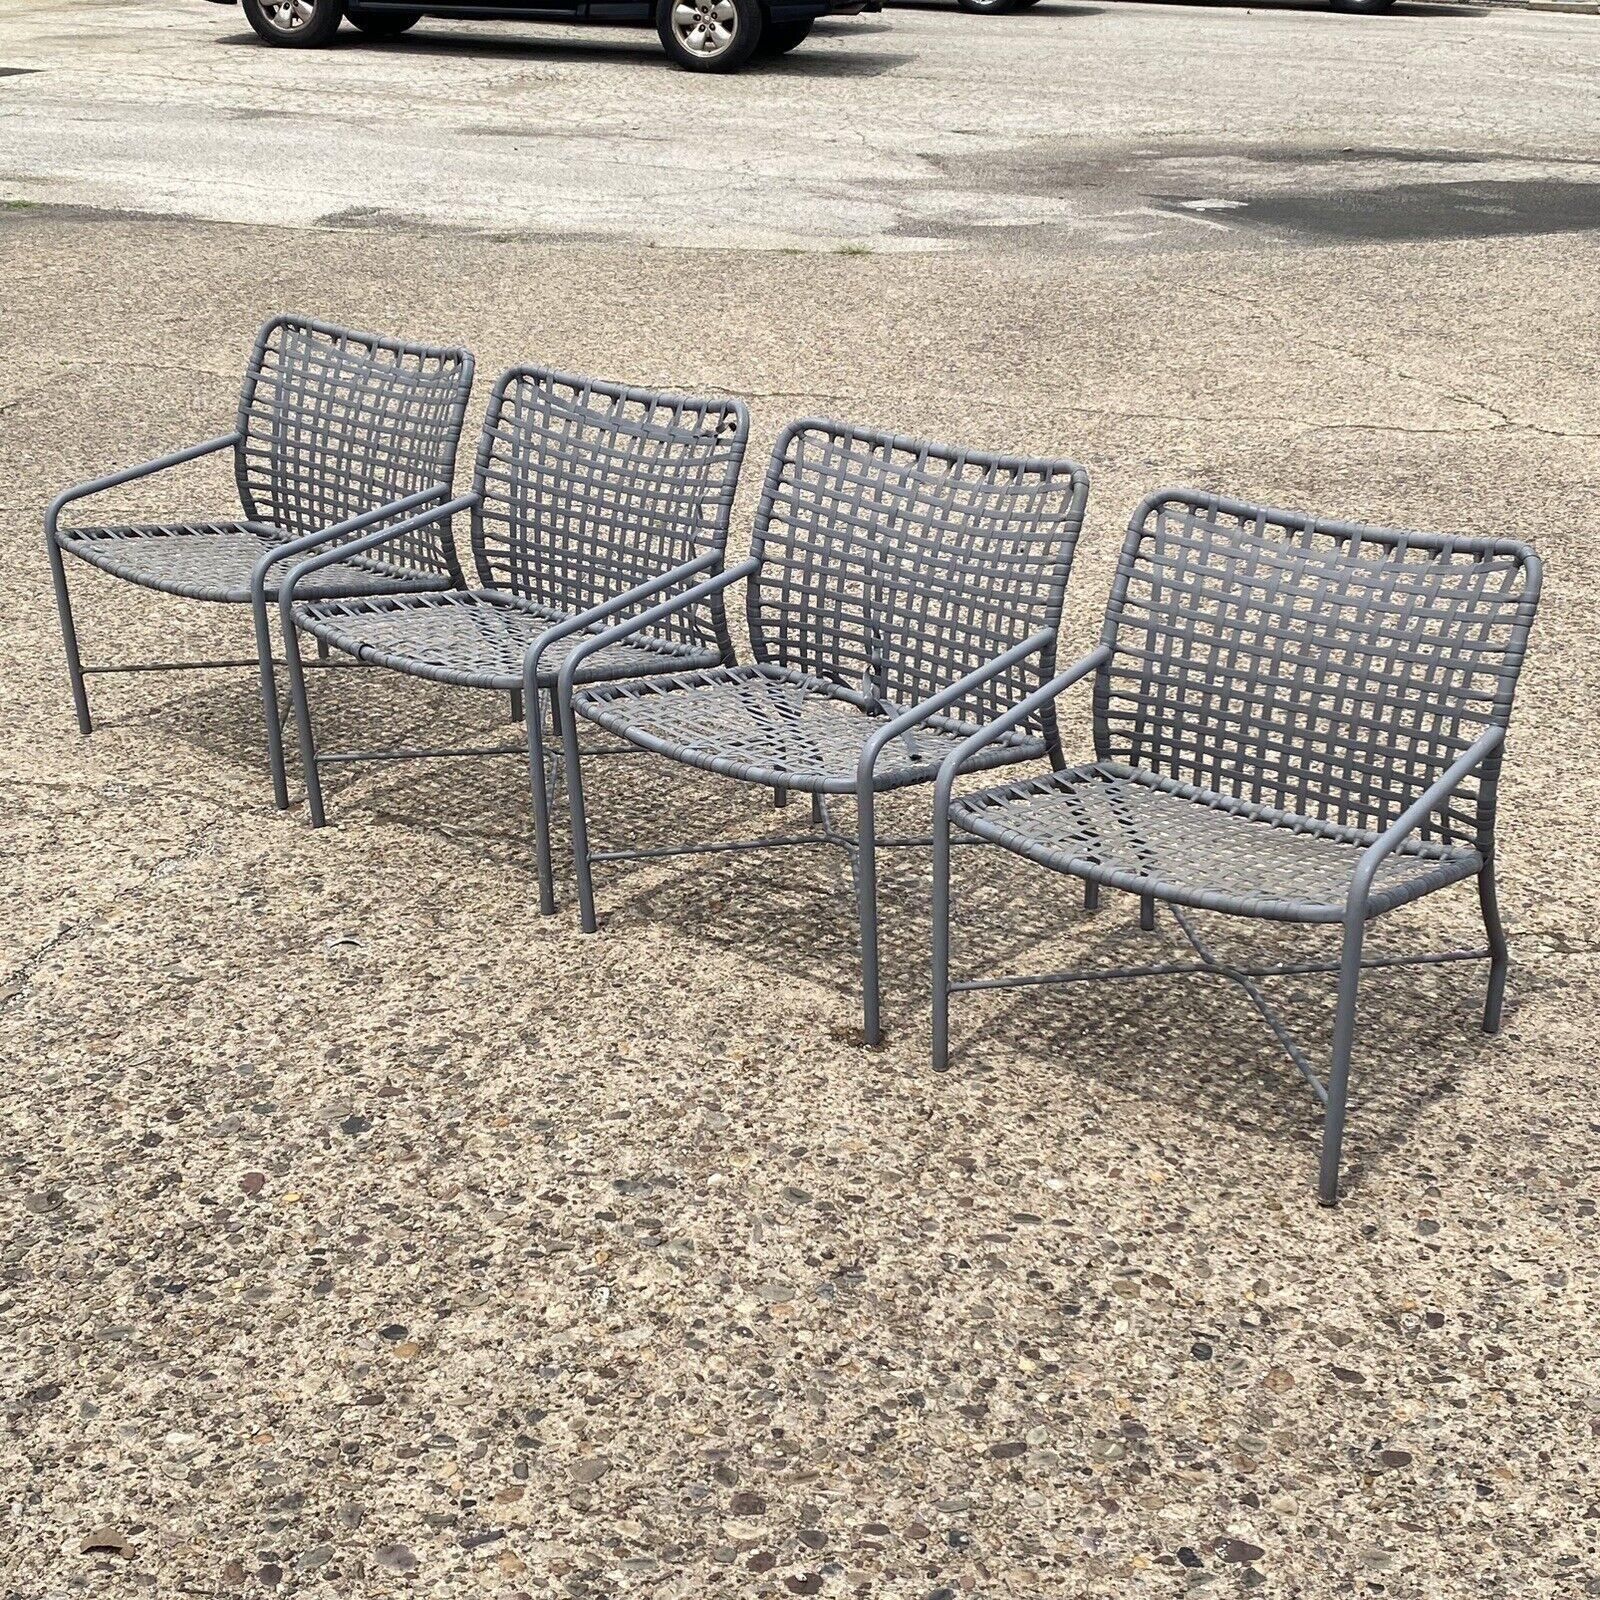 Tropitone Leilani Aluminum Frame Pool Patio Lounge Chairs - Set 4. Item features a nice wide aluminum frames, vinyl strap seats, original label, great style and form. Circa  Late 20th Century. Measurements: 29